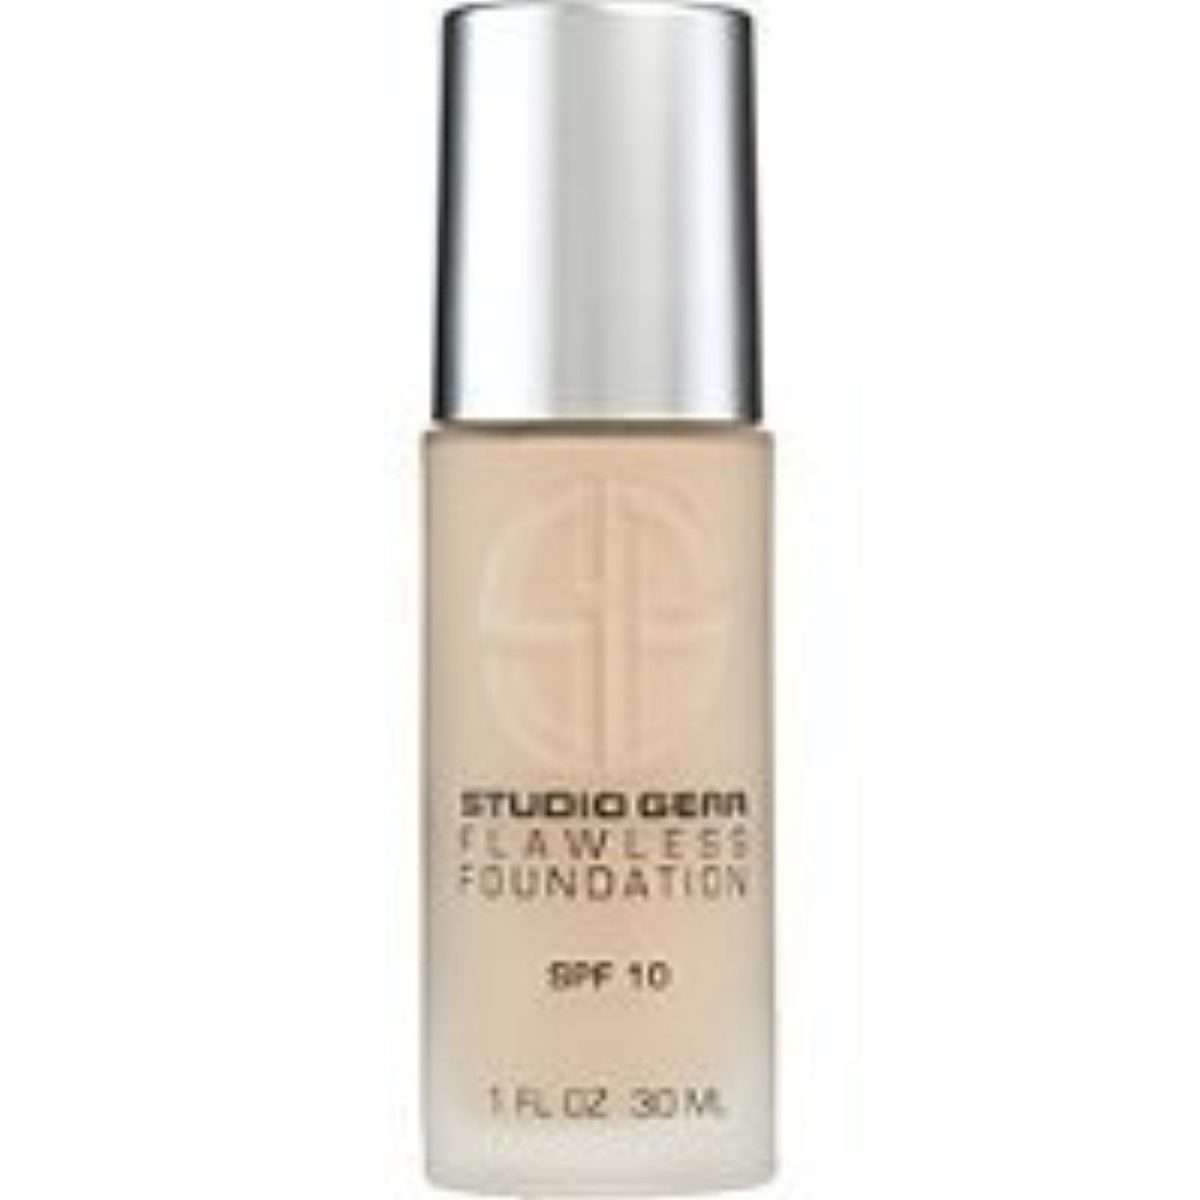 Flawless Foundation Bisque SPF 15 by Studio Gear Cosmetics